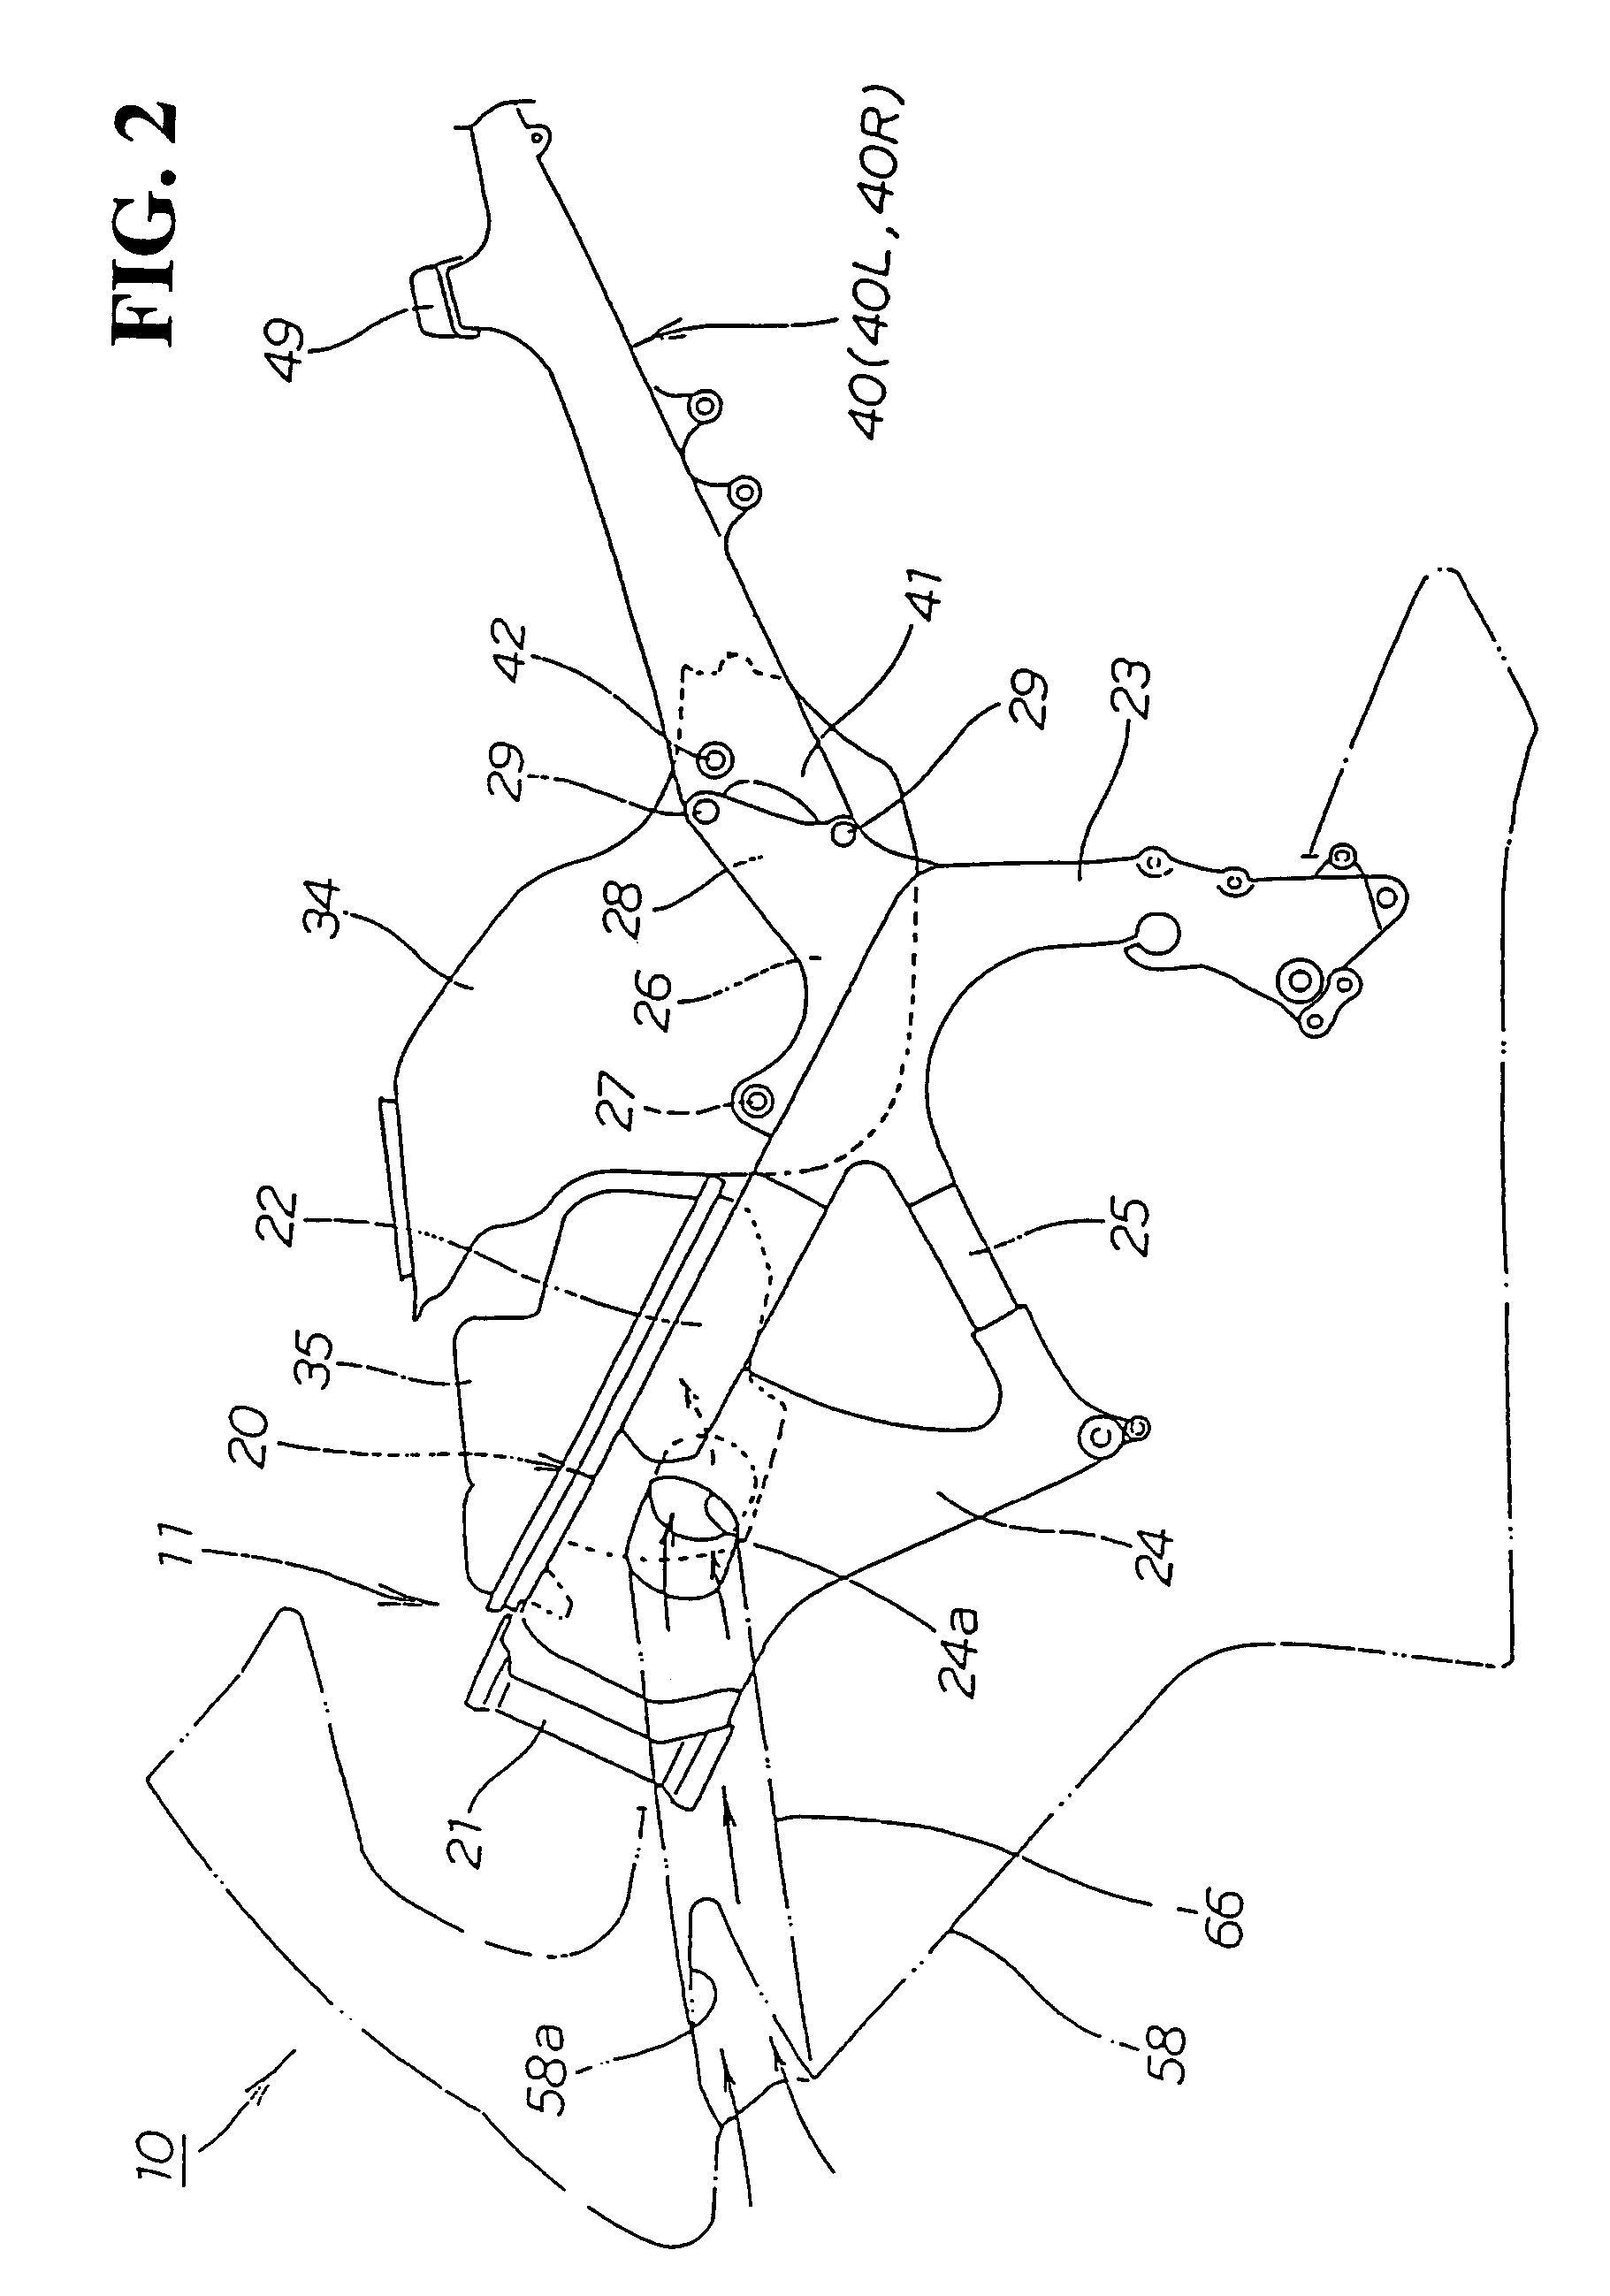 Engine fuel injection apparatus